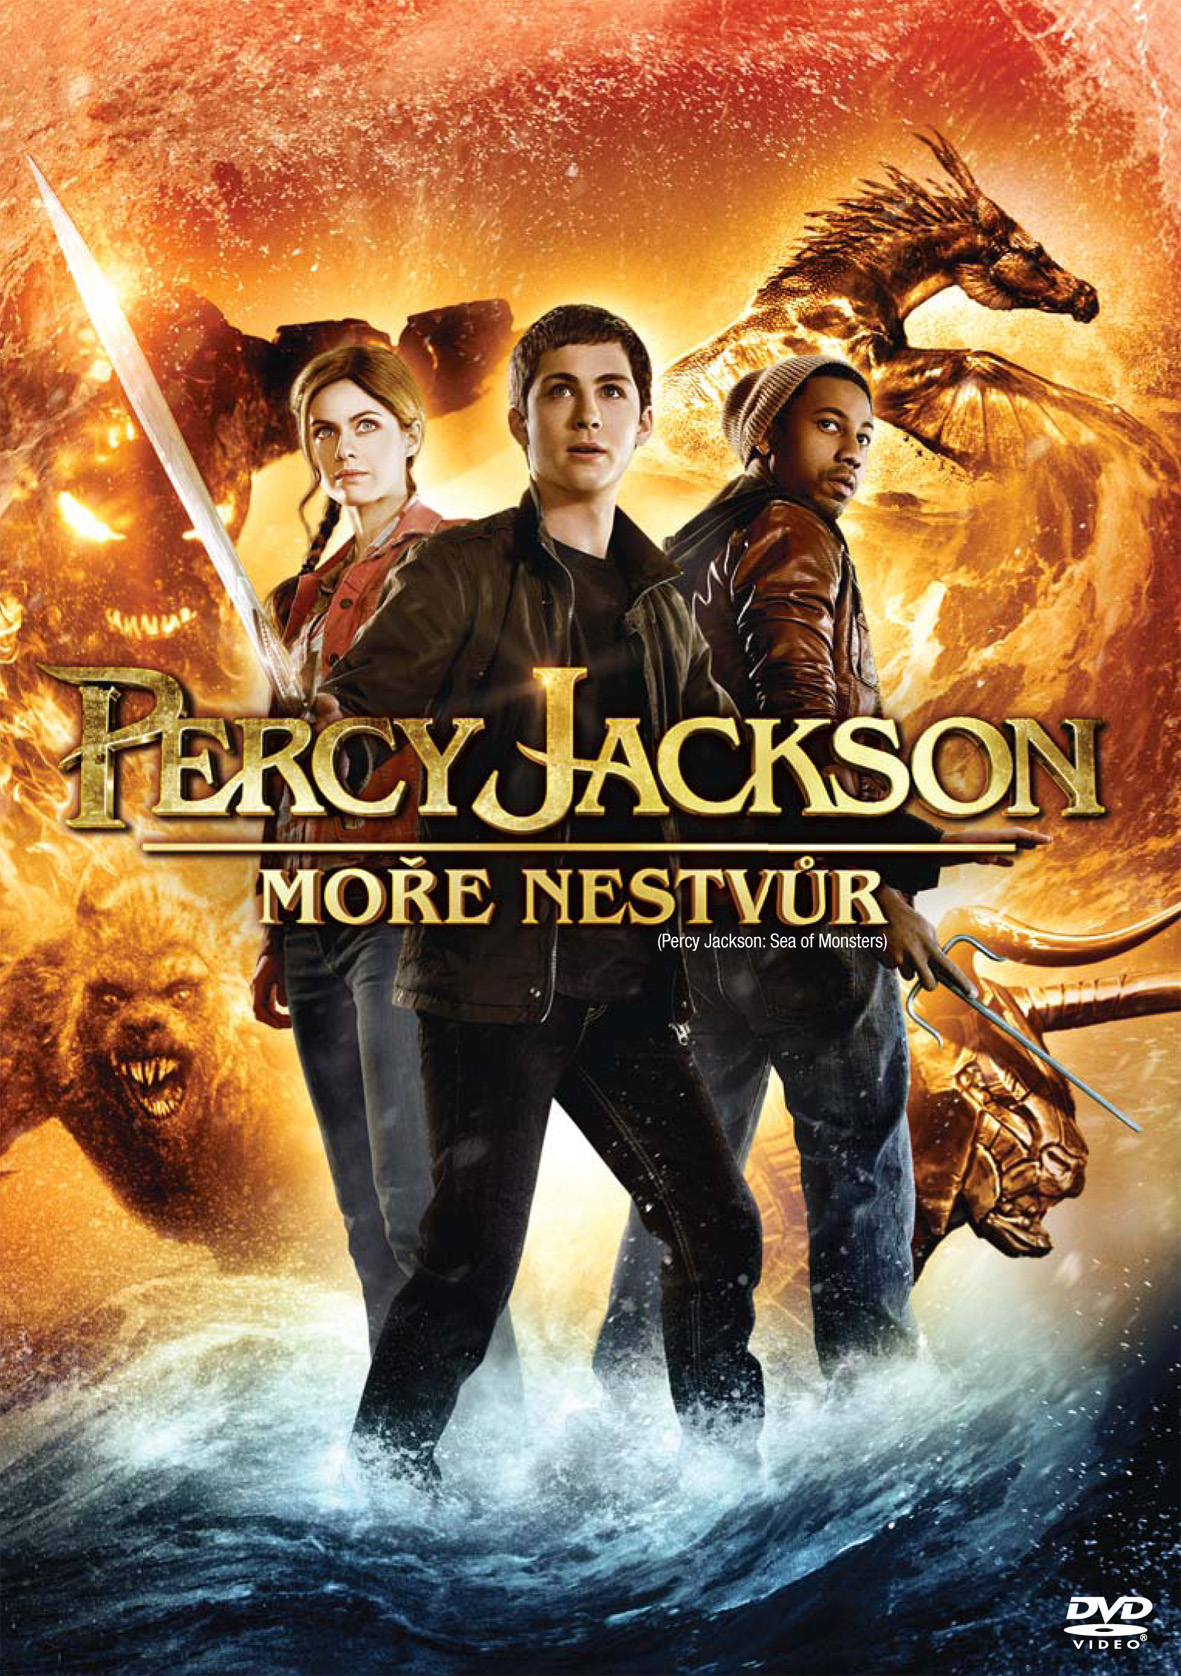 watch percy jackson movie online free without downloading